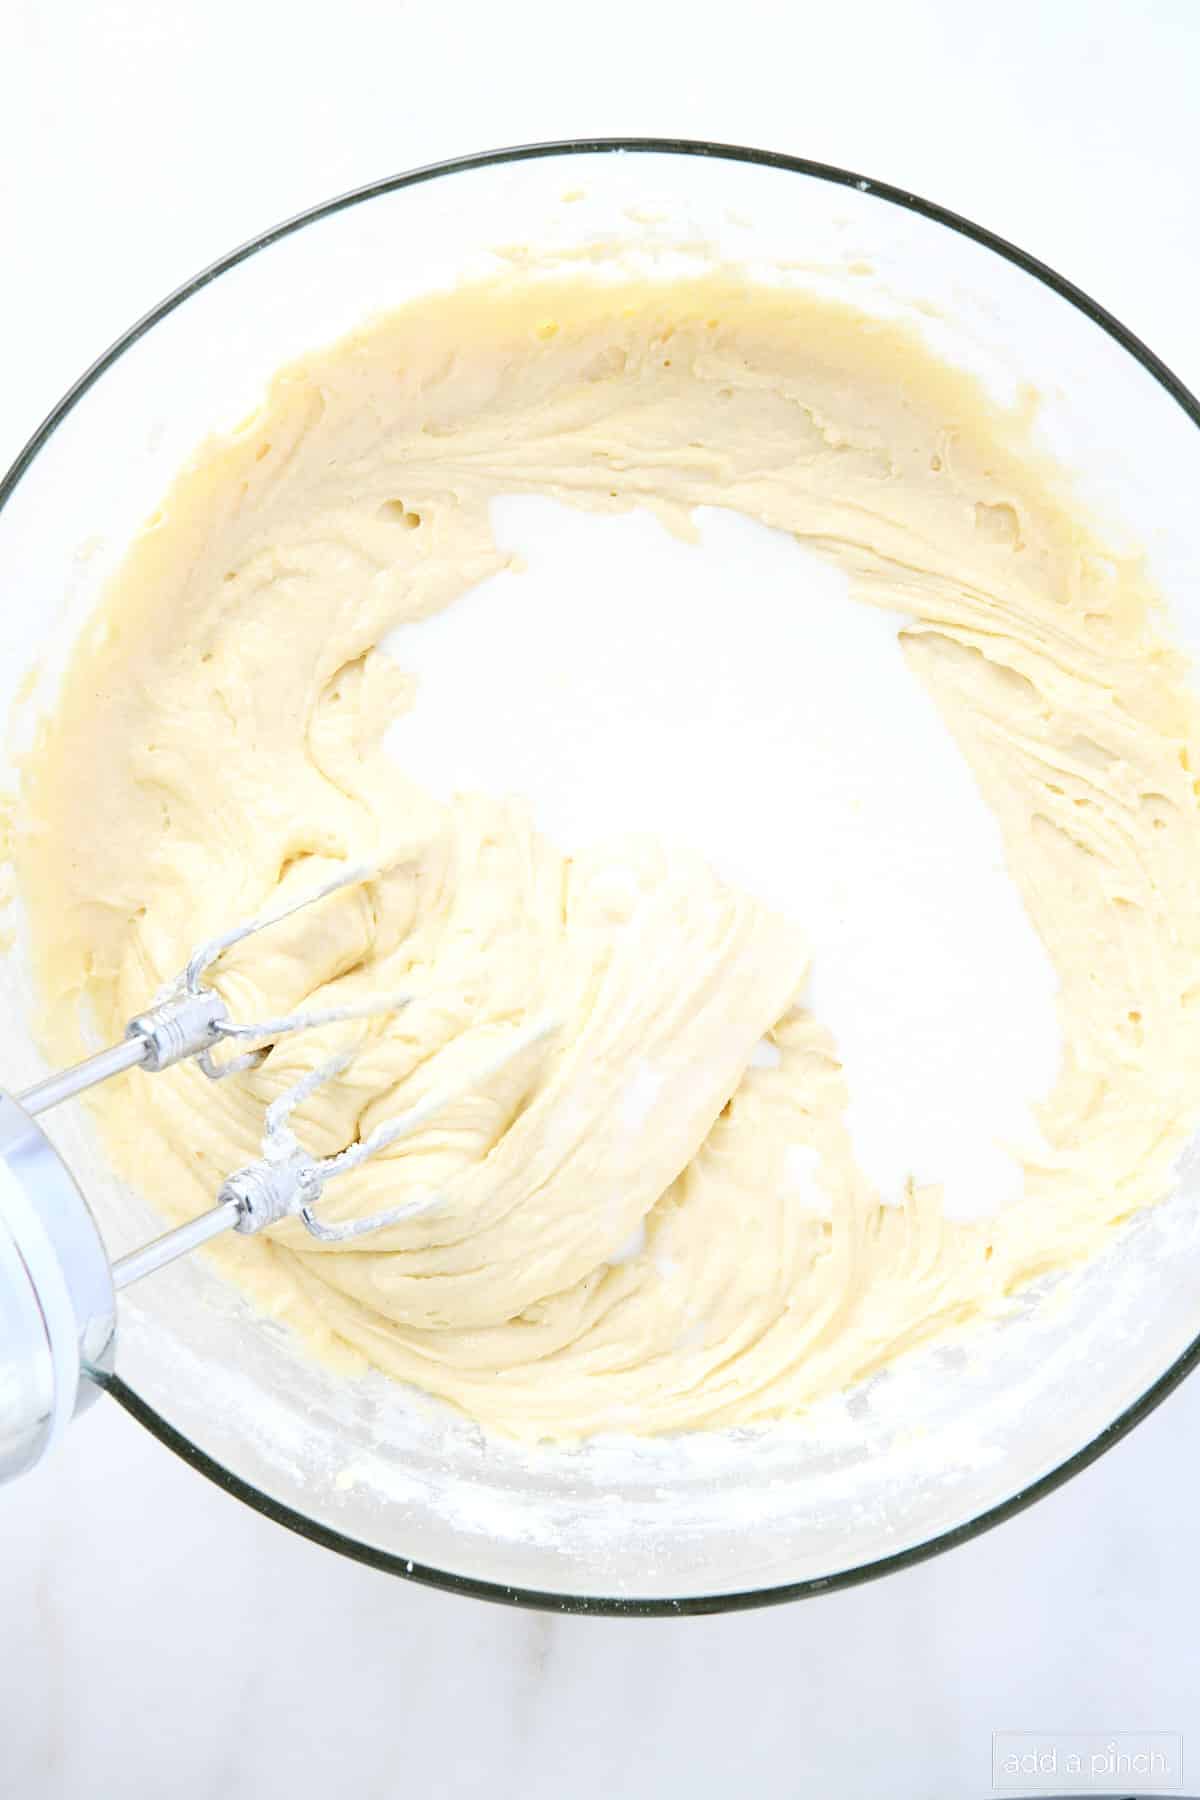 Milk is added to a glass mixing bowl and is being mixed into cake batter with hand mixer.